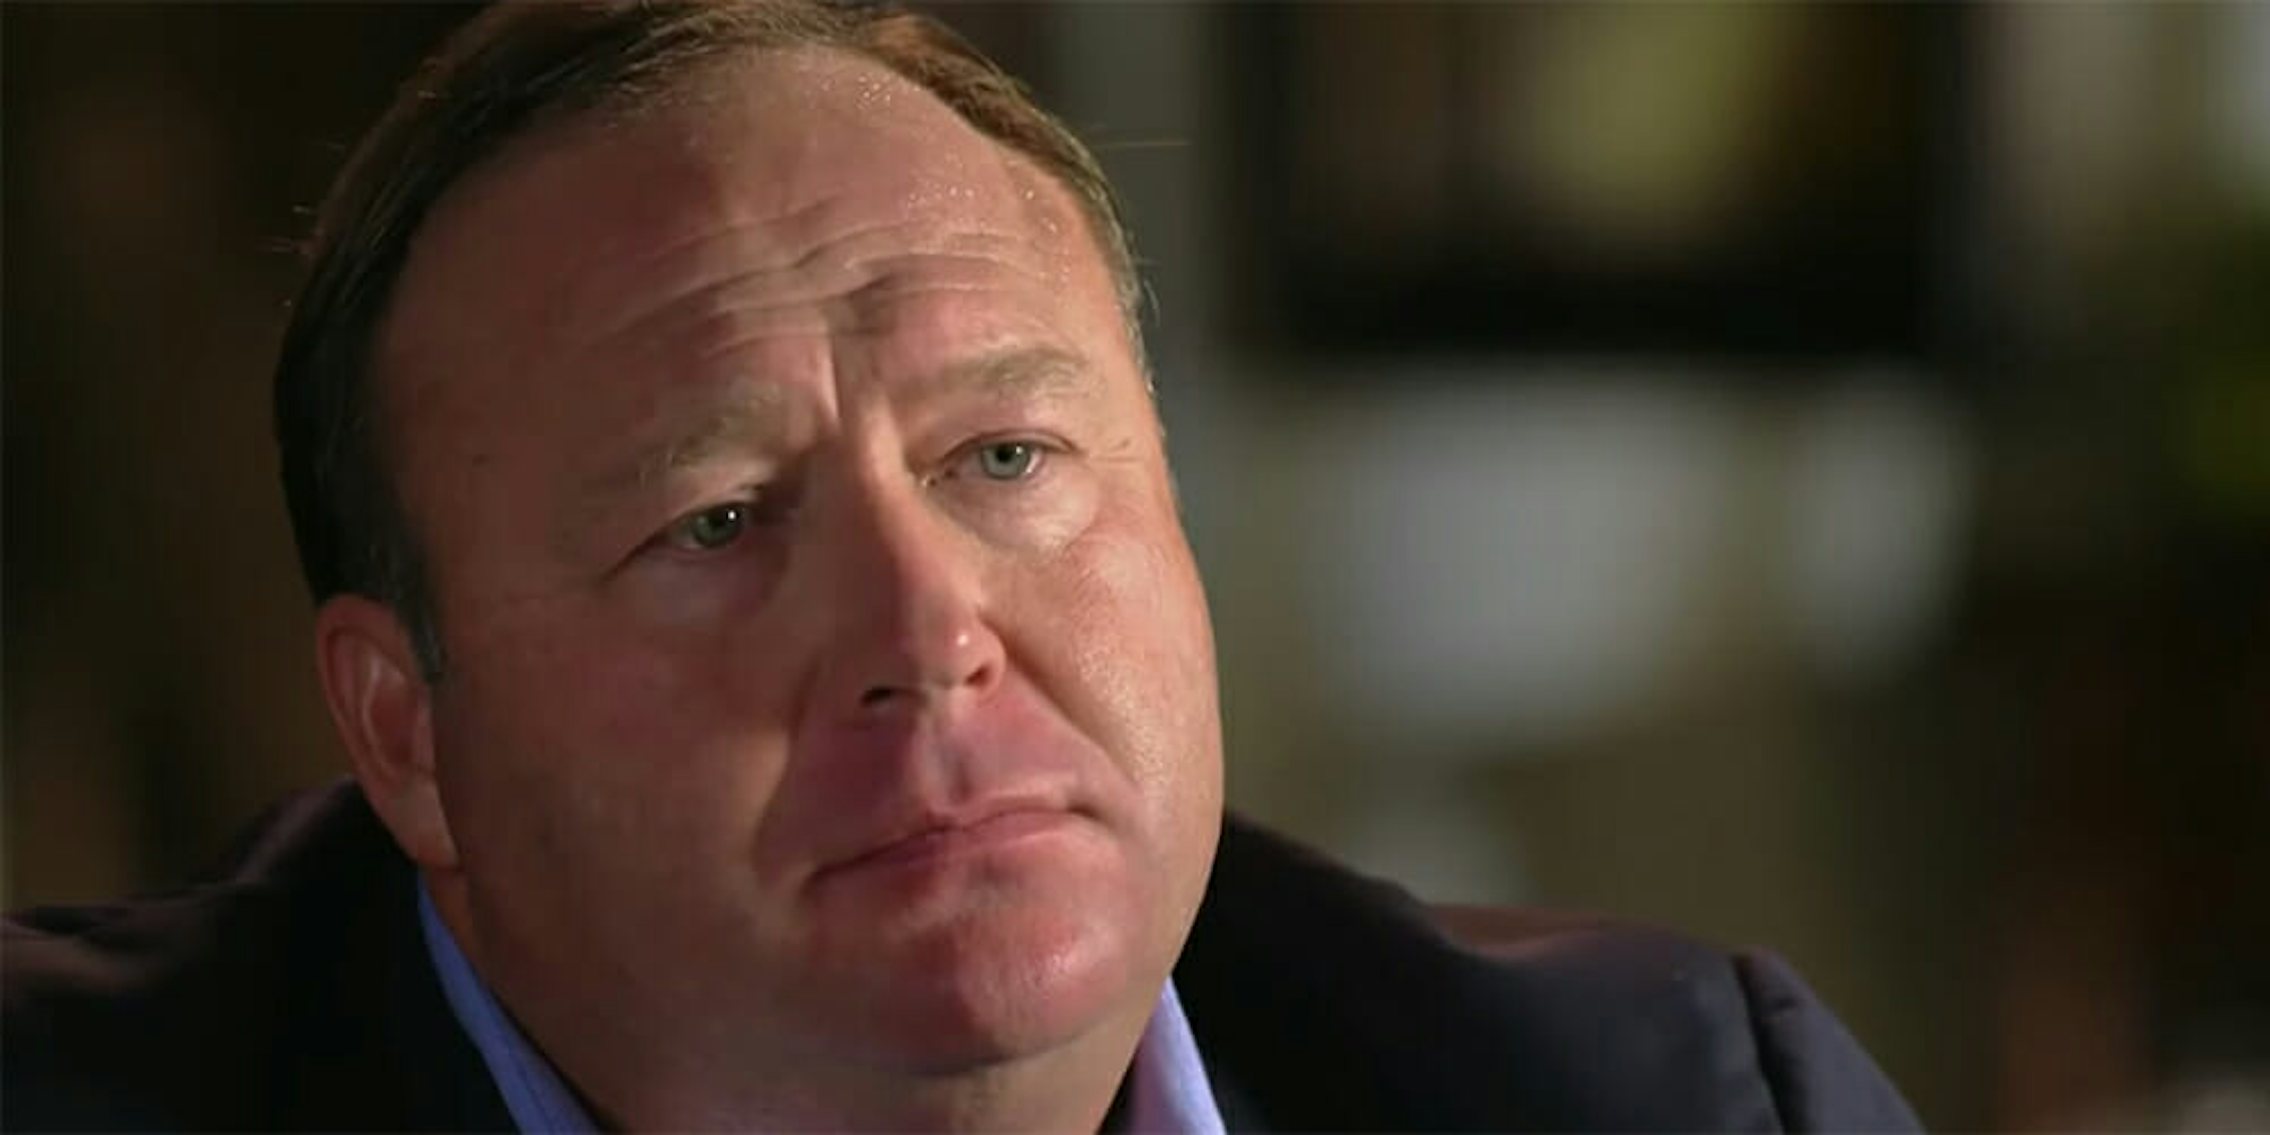 Alex Jones says he spoke to QAnon and that the anonymous account has been 'compromised.'